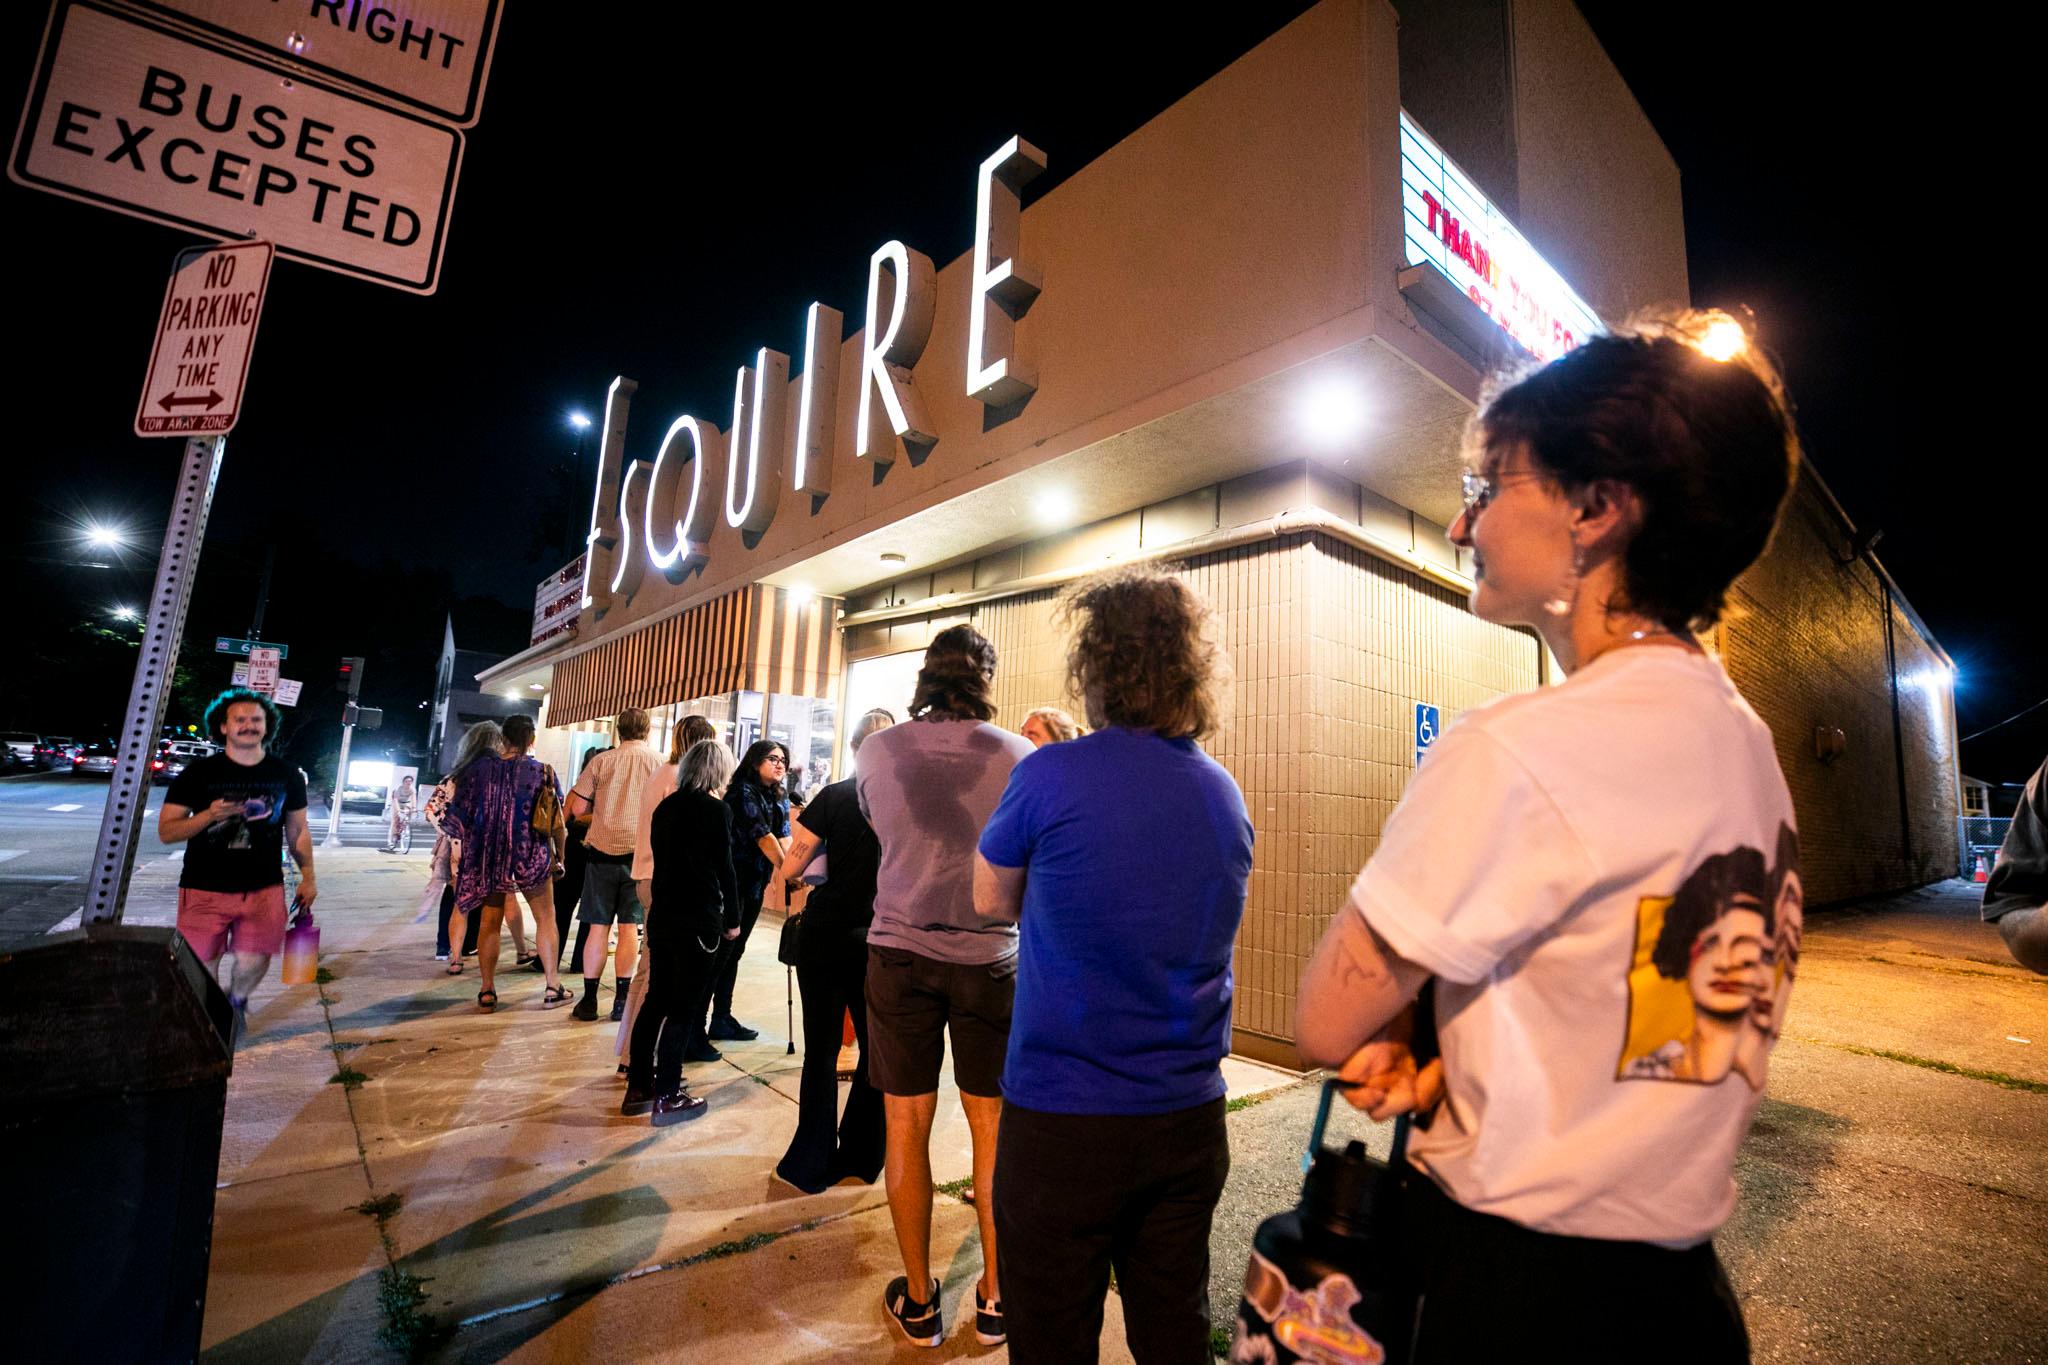 The Esquire Theater's illuminated letters glow above a lone of people waiting on the sidewalk to get inside.